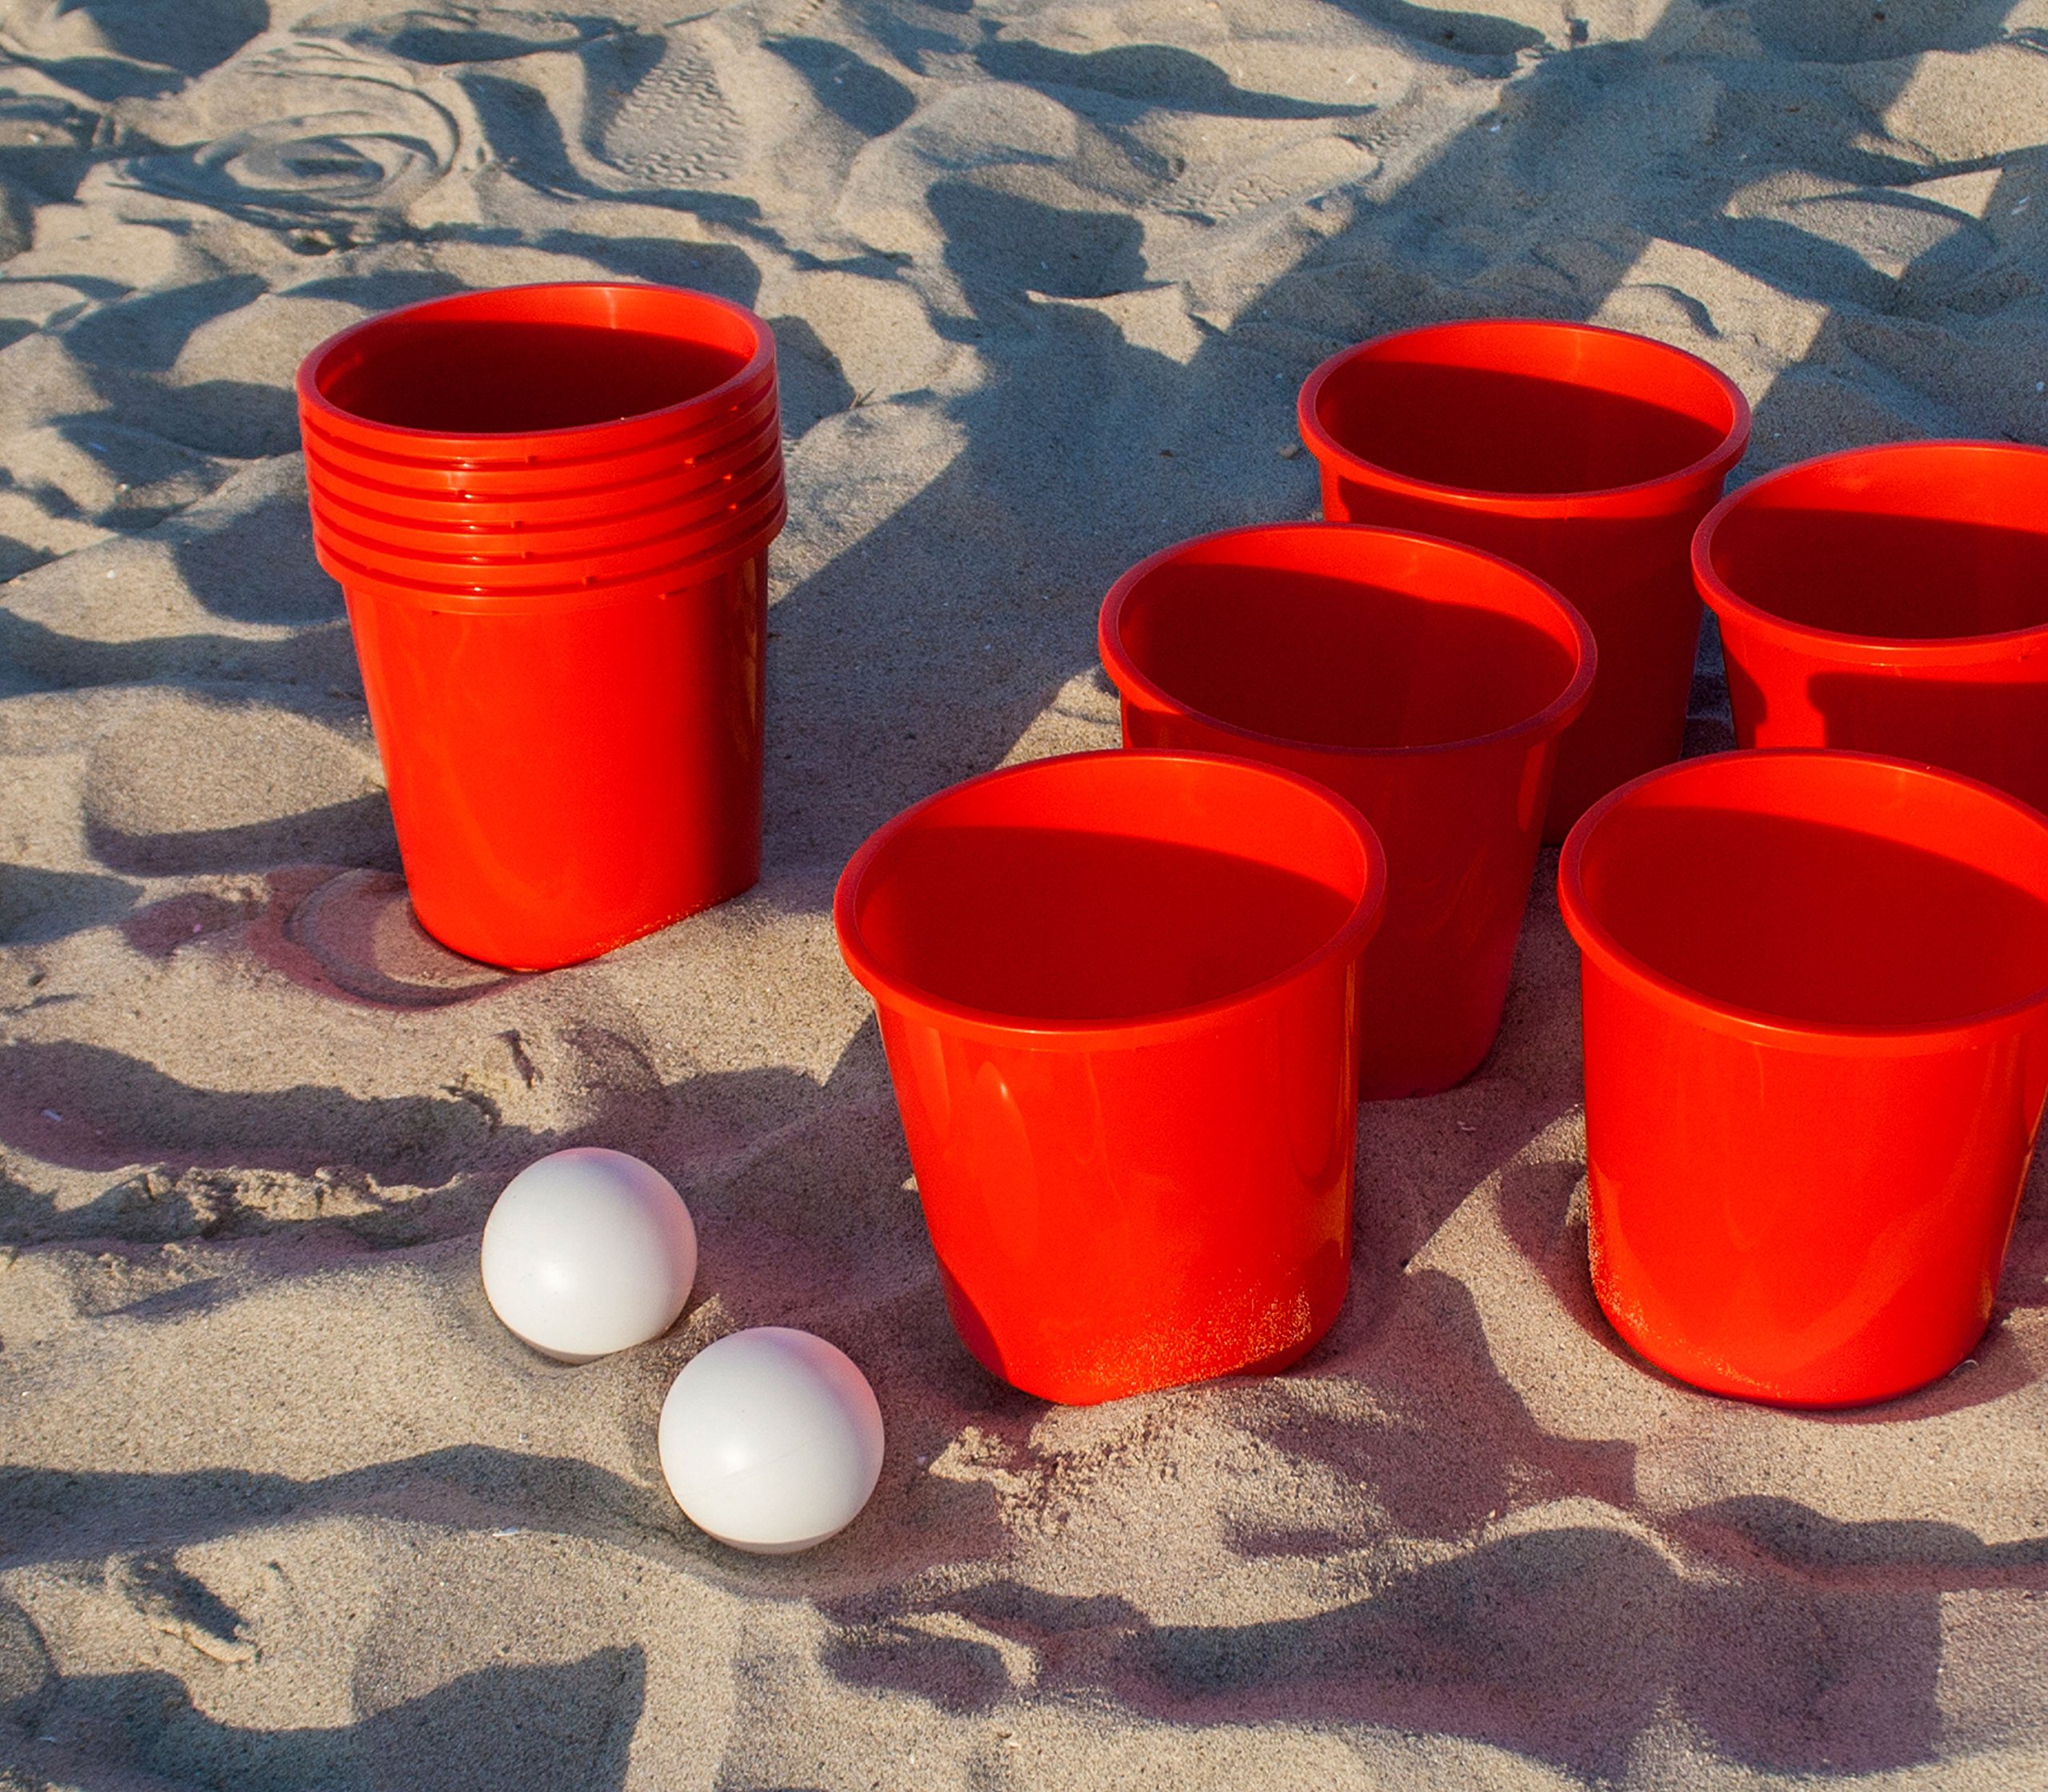 Yard Games Giant Yard Pong with Durable Buckets and Balls Including High Strength Carrying Case